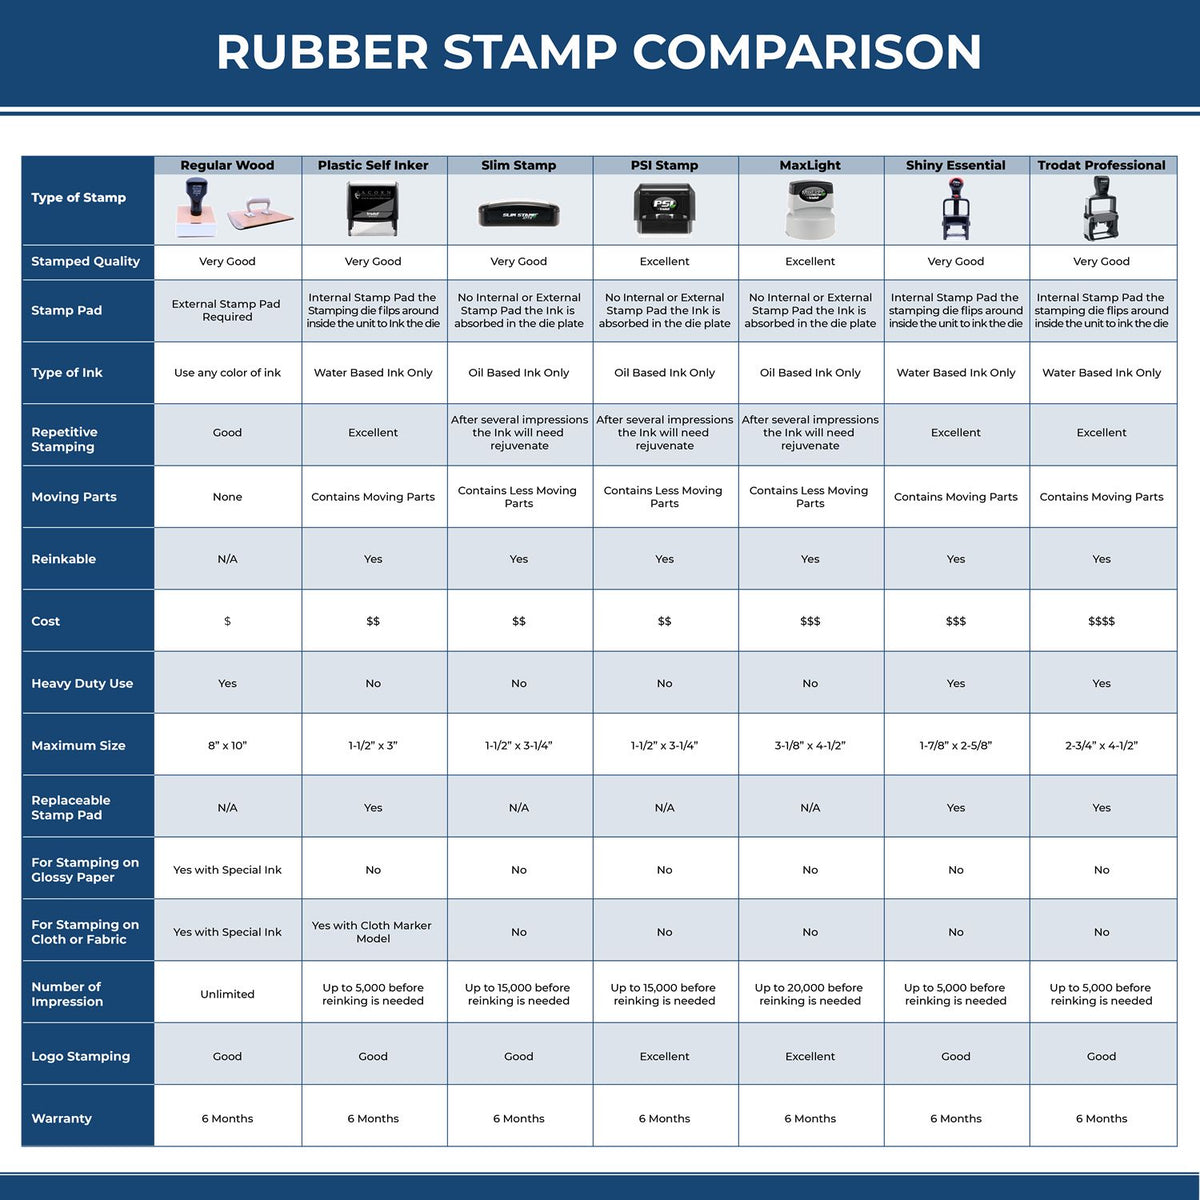 Large Insurance Rubber Stamp 4508R Rubber Stamp Comparison